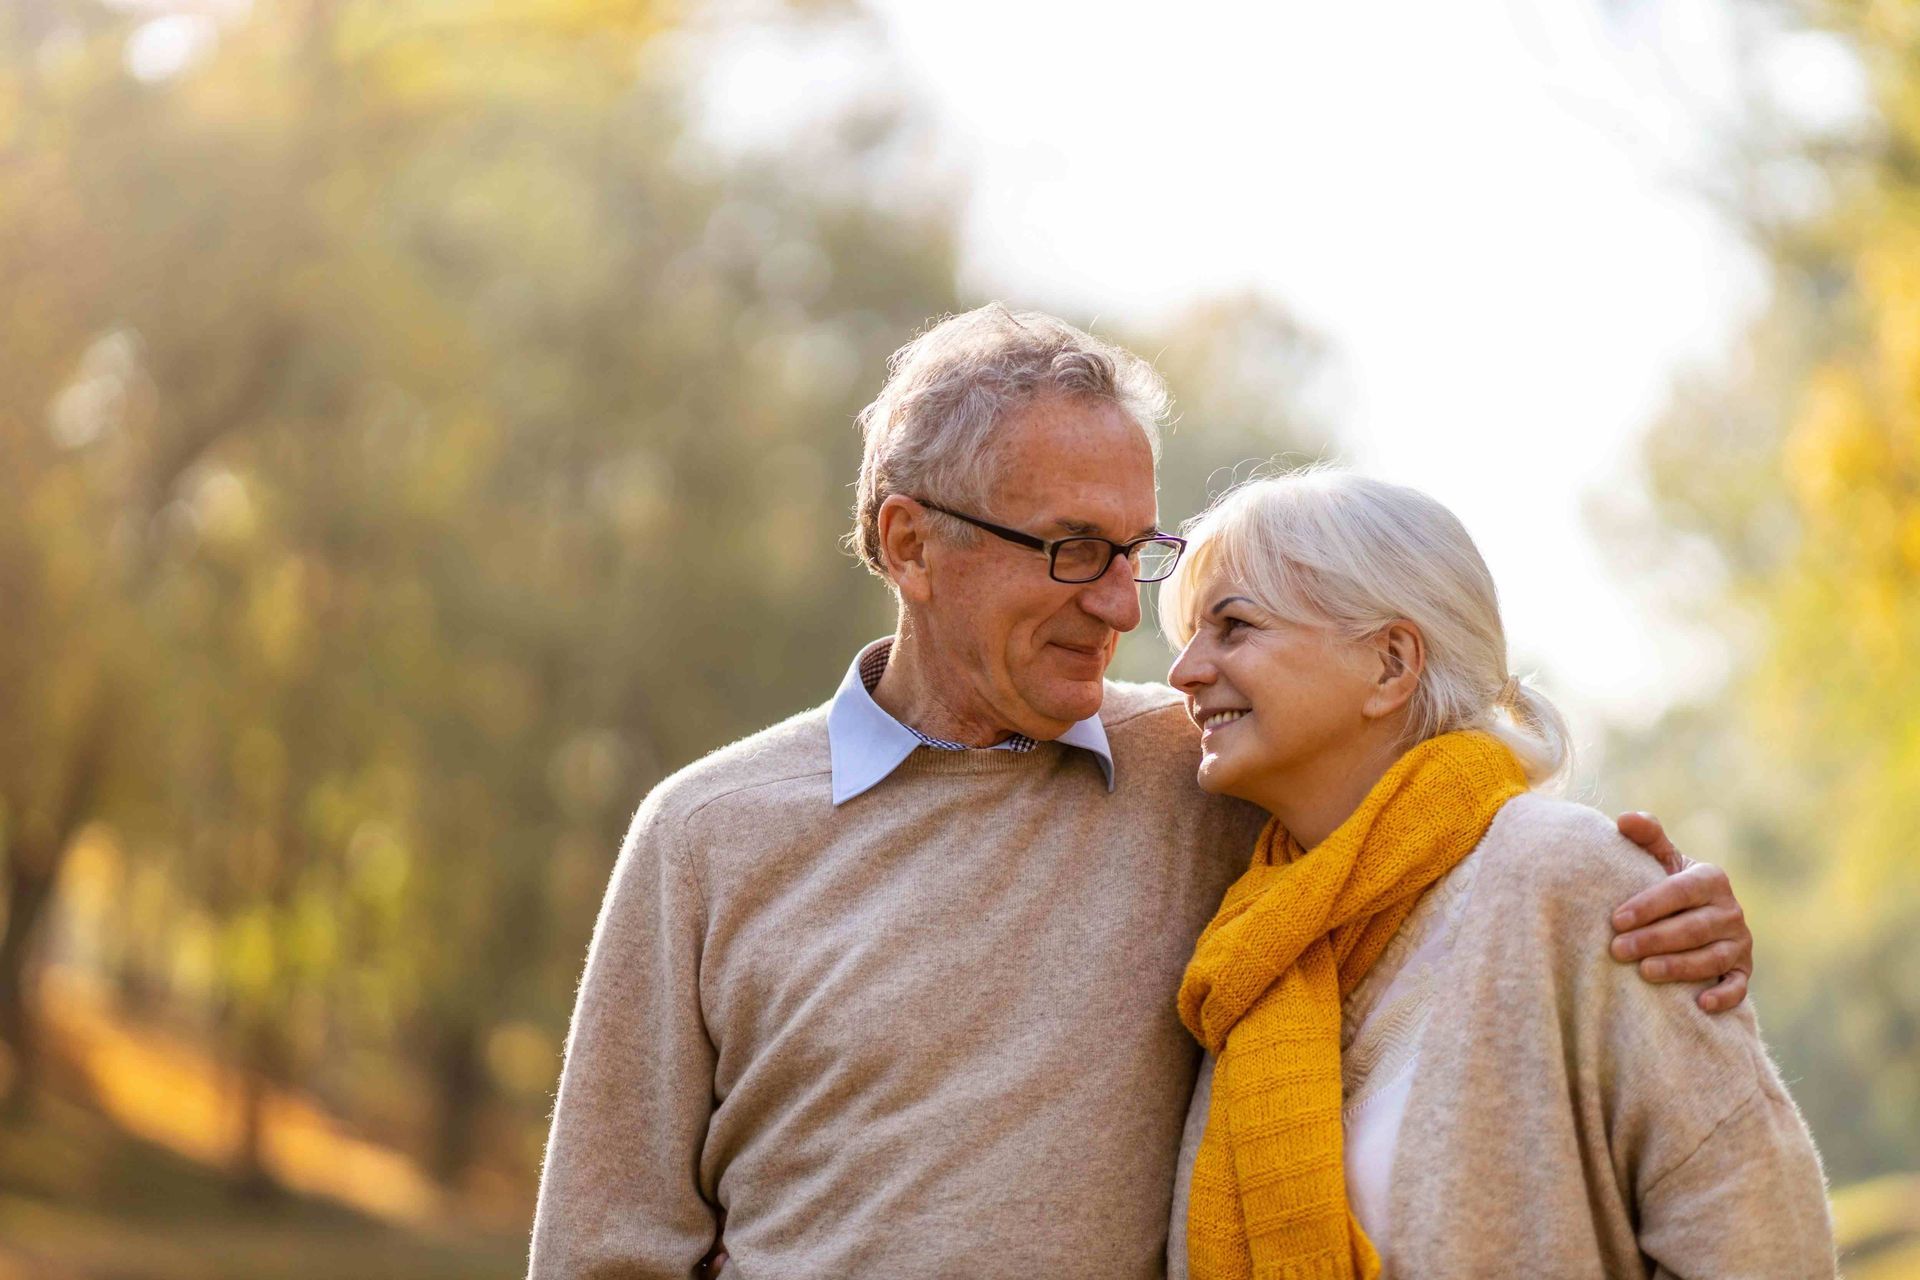 Social Security and Retirement. What does "Full Retirement Age" Mean?